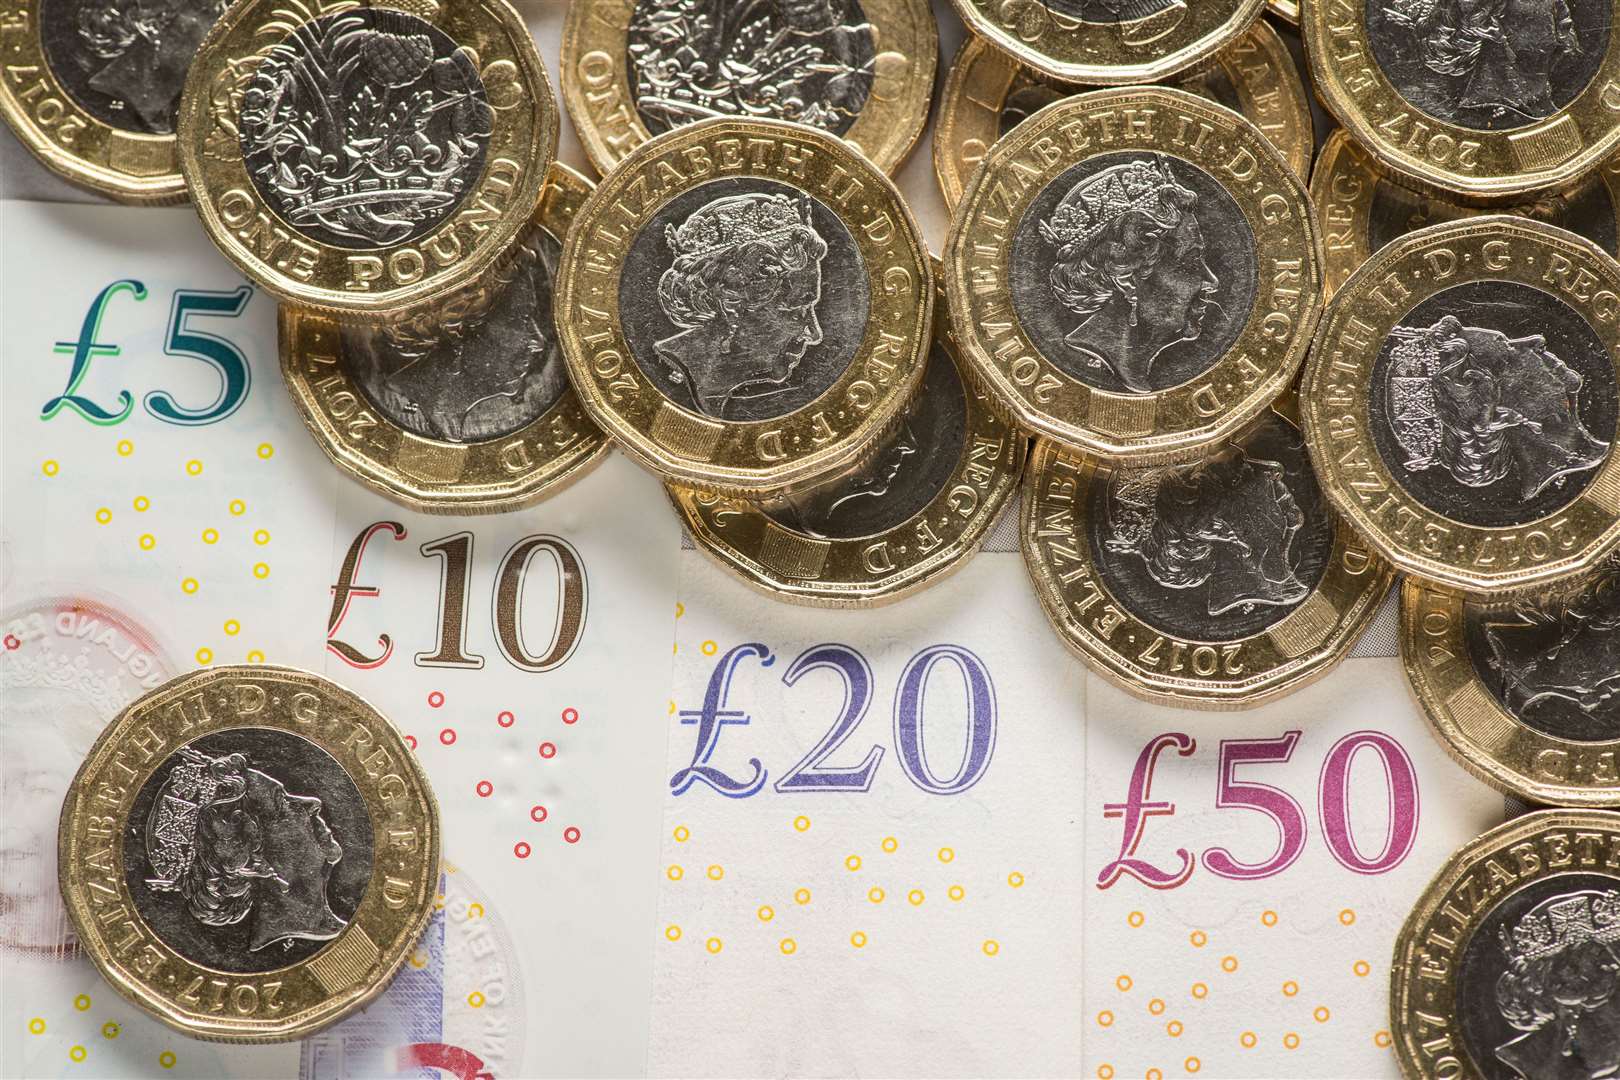 Labour says adults will struggle to make up the £20 cut